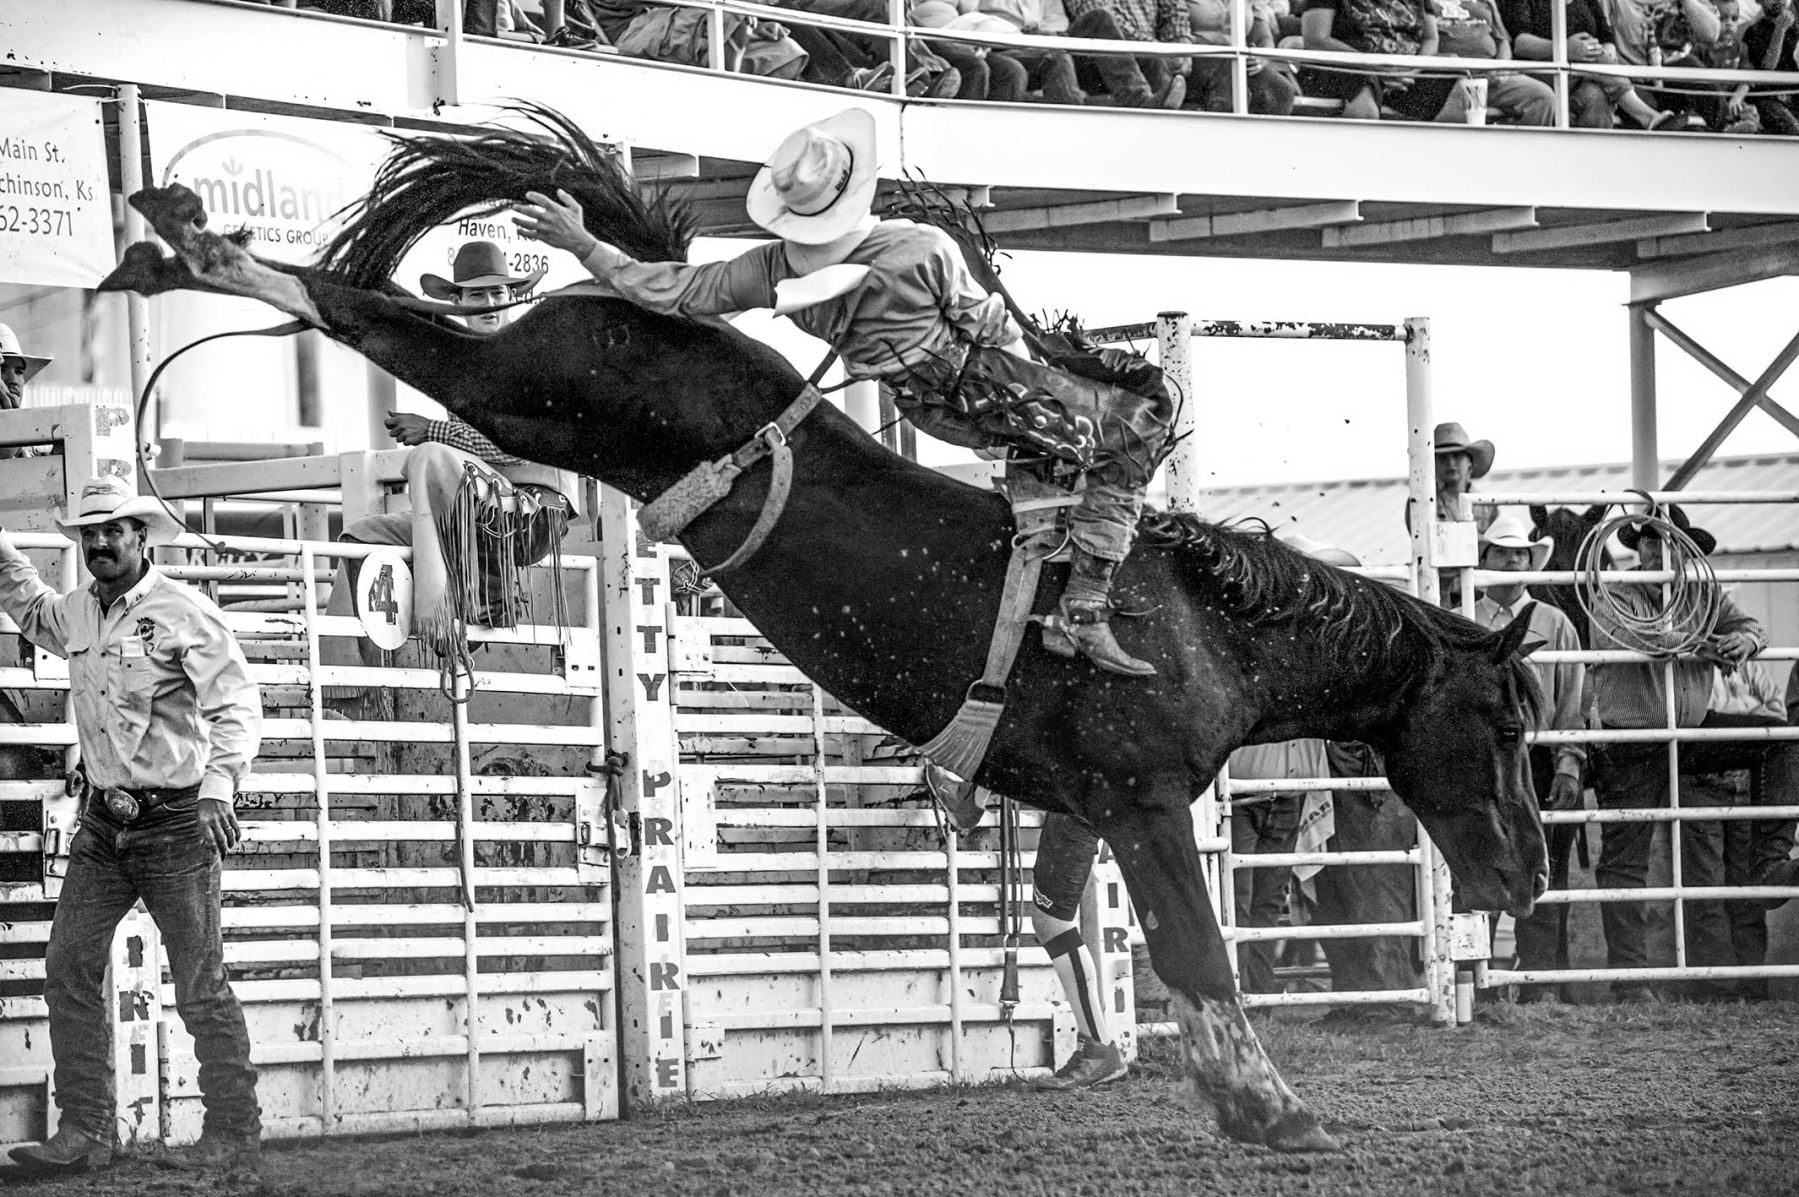 “The title of this picture is The Beast. It was shot in Kansas at a rodeo. To me, the horse looks like this massive beast,” Krantz says,” If you look at the size of the horse and the size of the guy, you're like, ‘Holy cow. How can you stay on something like that?’ He's a bronco rider. This guy is probably not getting bucked off yet. He's in a pretty great position right there. But he probably will not last for more than four seconds.”